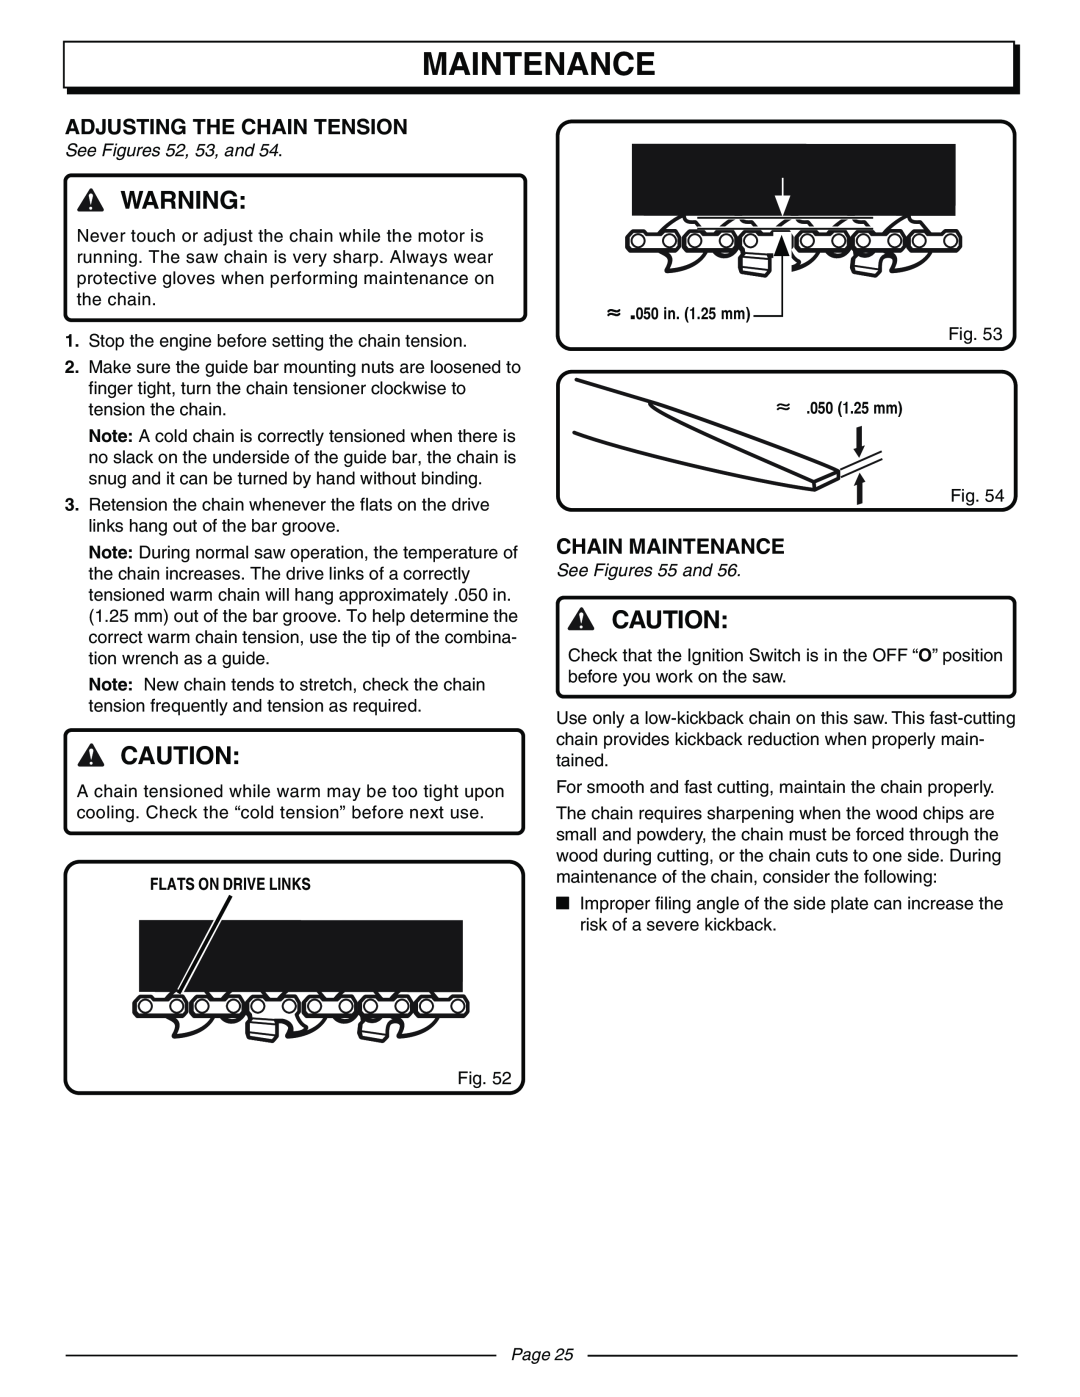 Homelite UT10942D manual Adjusting The Chain Tension, Chain Maintenance, See Figures 52, 53, and, See Figures 55 and, Page 